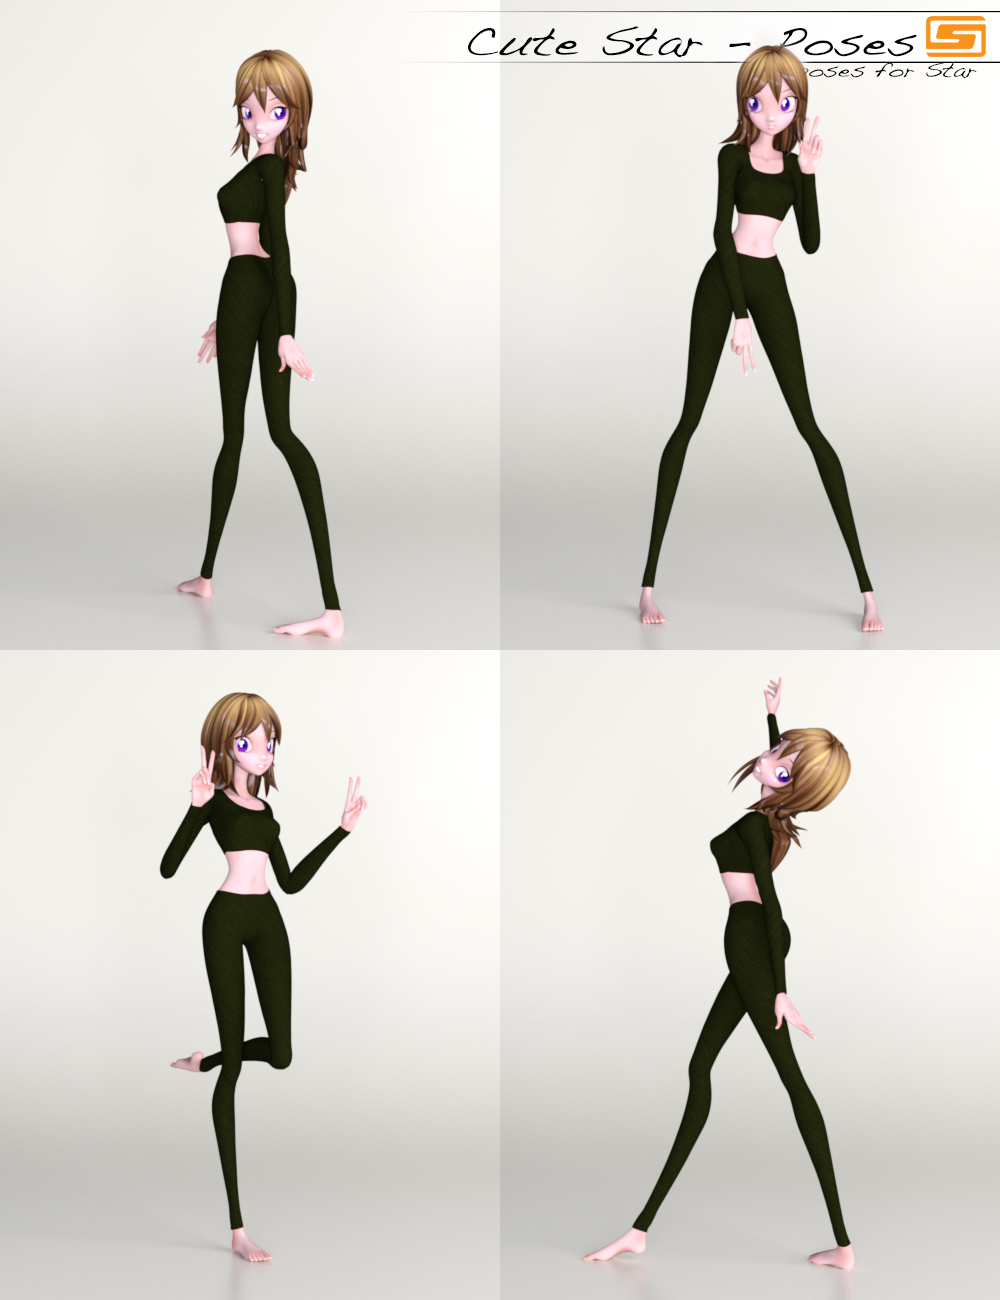 Cute Star - Poses for Star! by: Sedor, 3D Models by Daz 3D